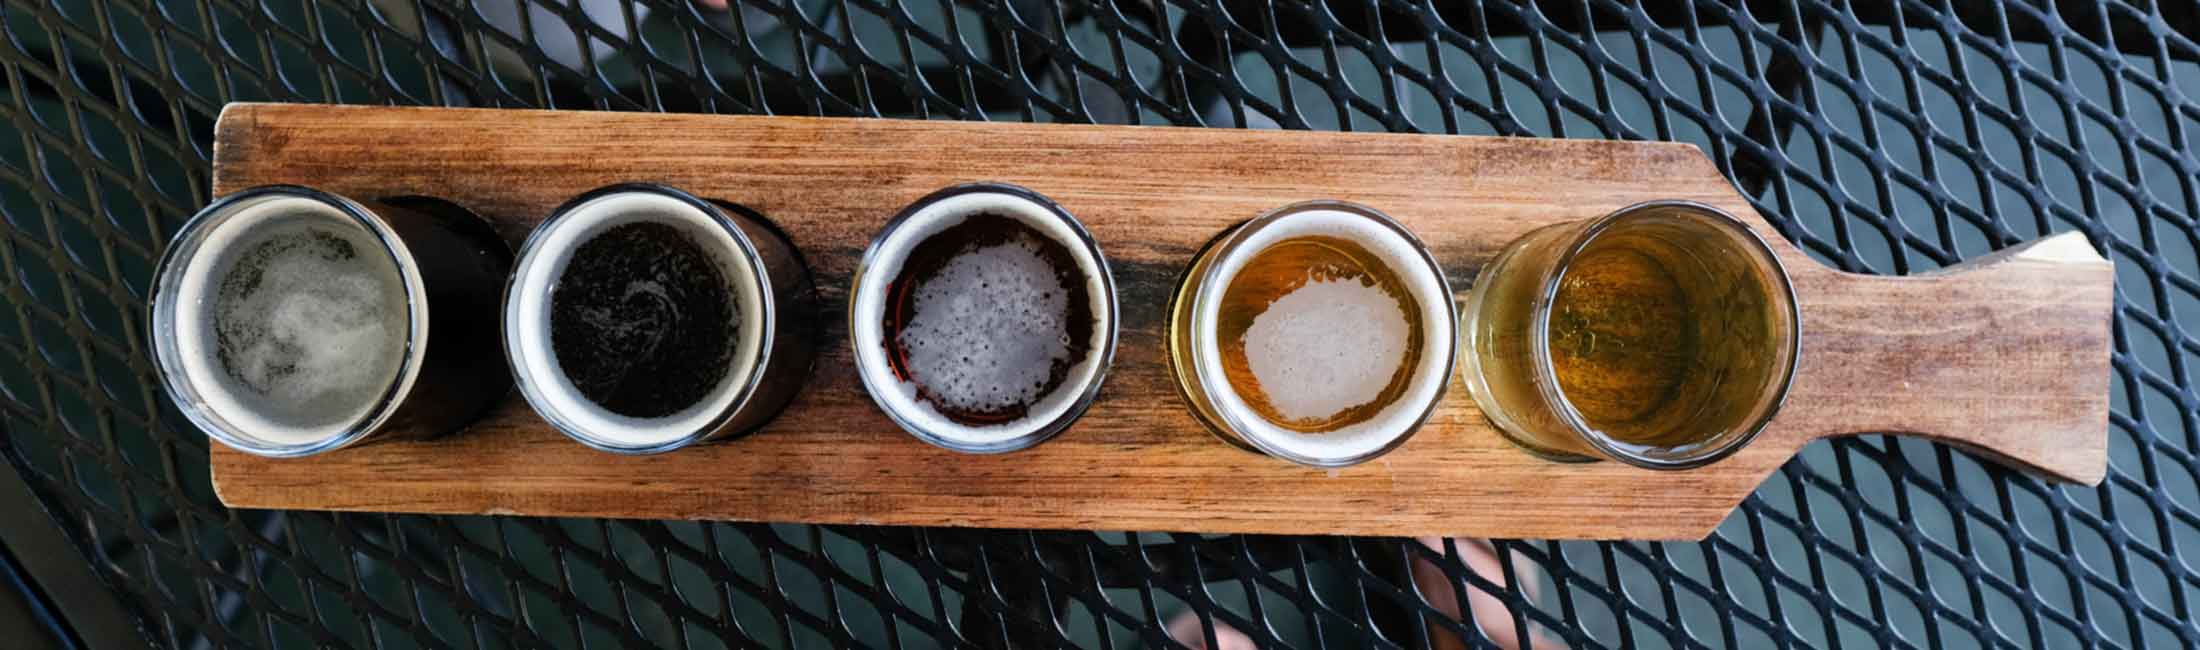 7 Breweries to Sample in Missoula